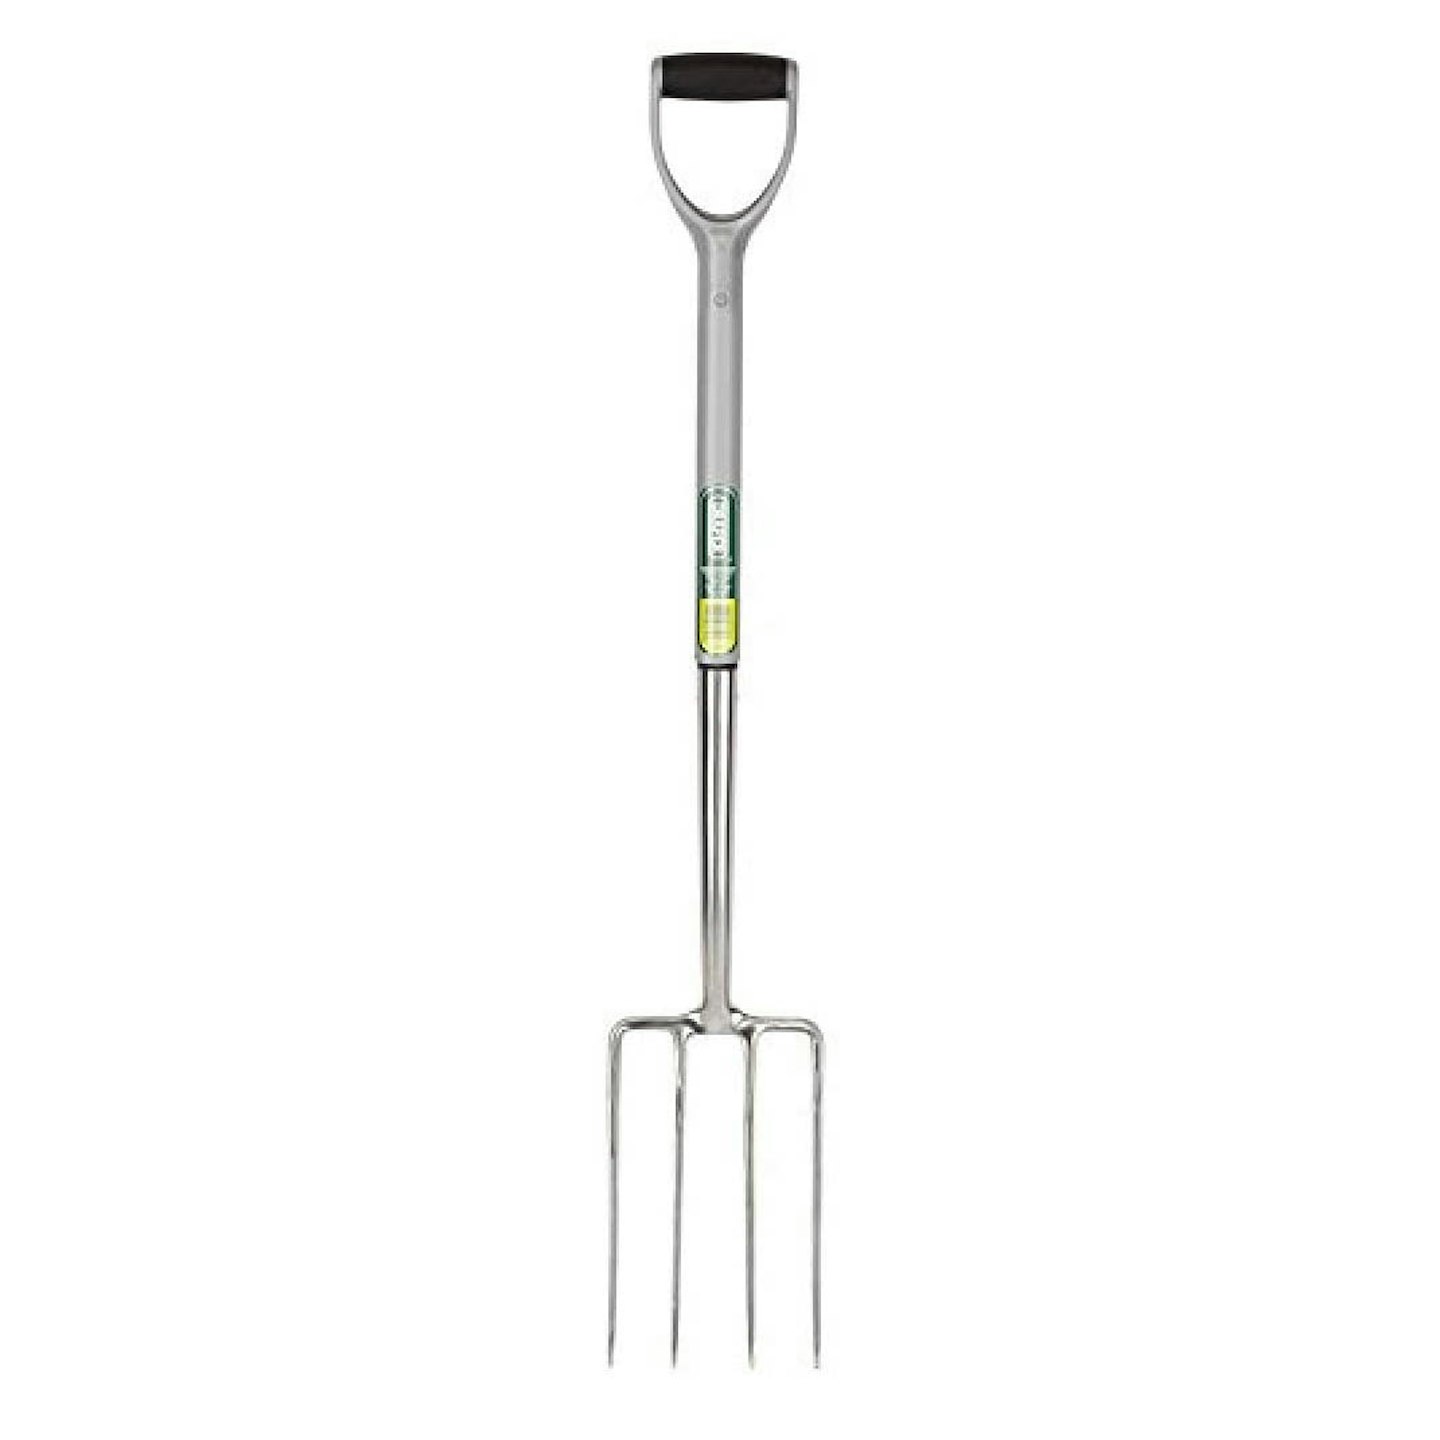 Draper 83755 Extra Long Stainless Steel Garden Fork with Soft Grip